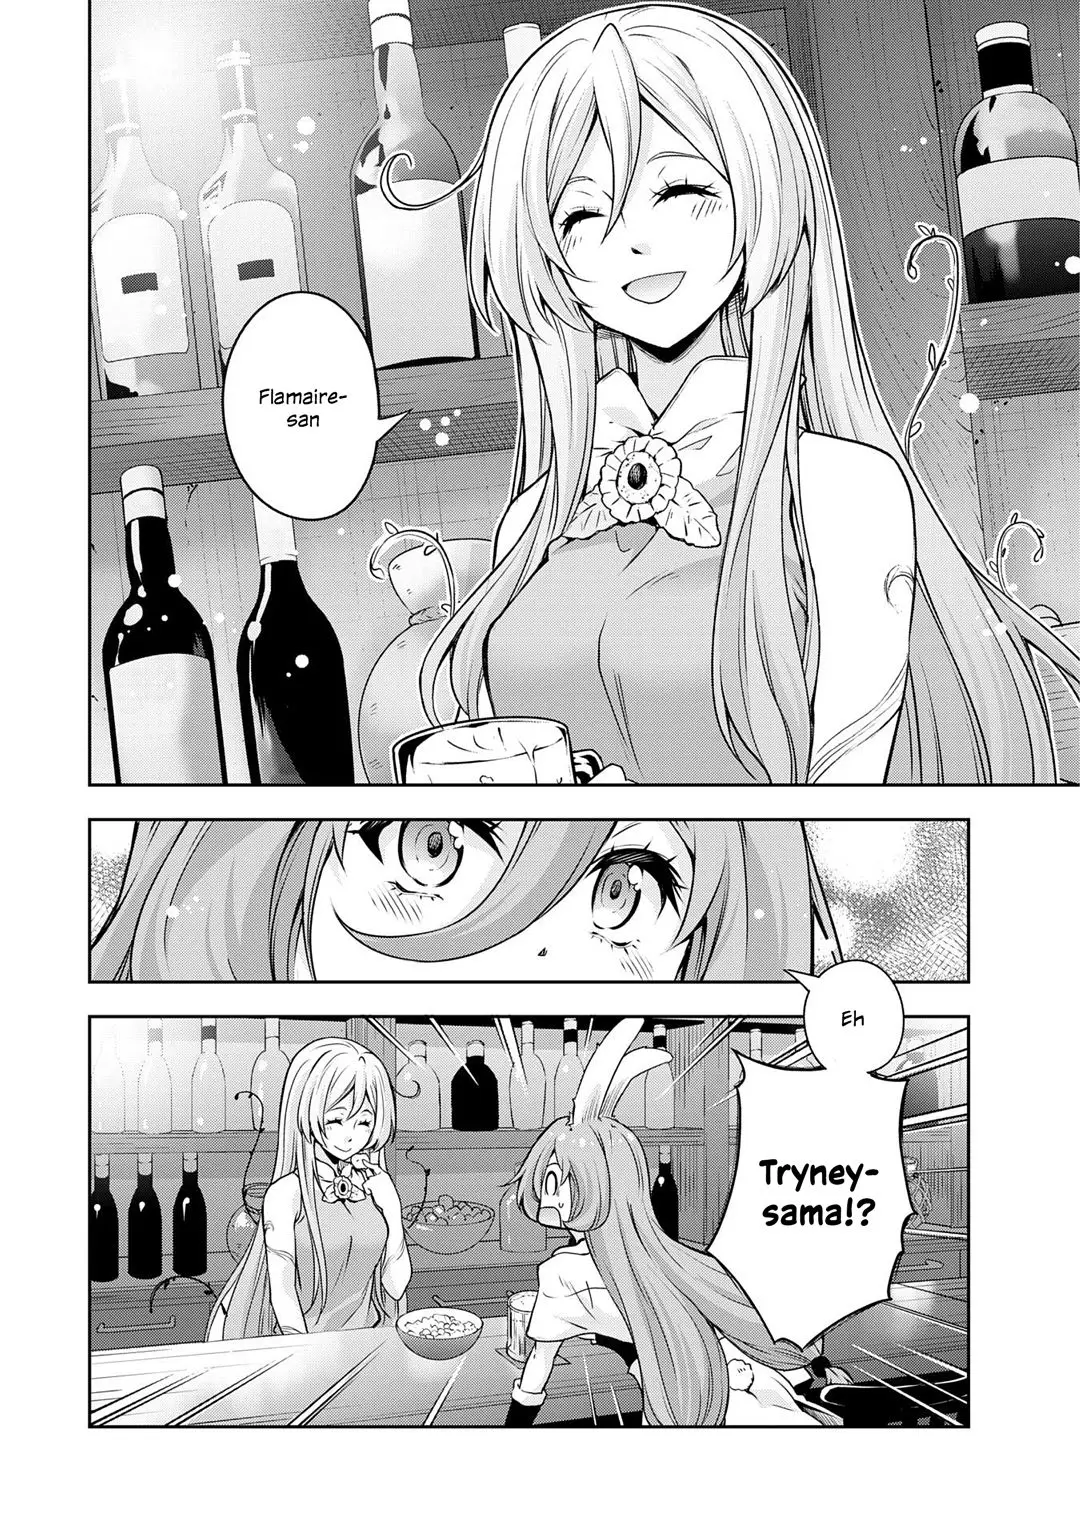 Tensei Shitara Slime Datta Ken: The Ways of Strolling in the Demon Country - 44 page 4